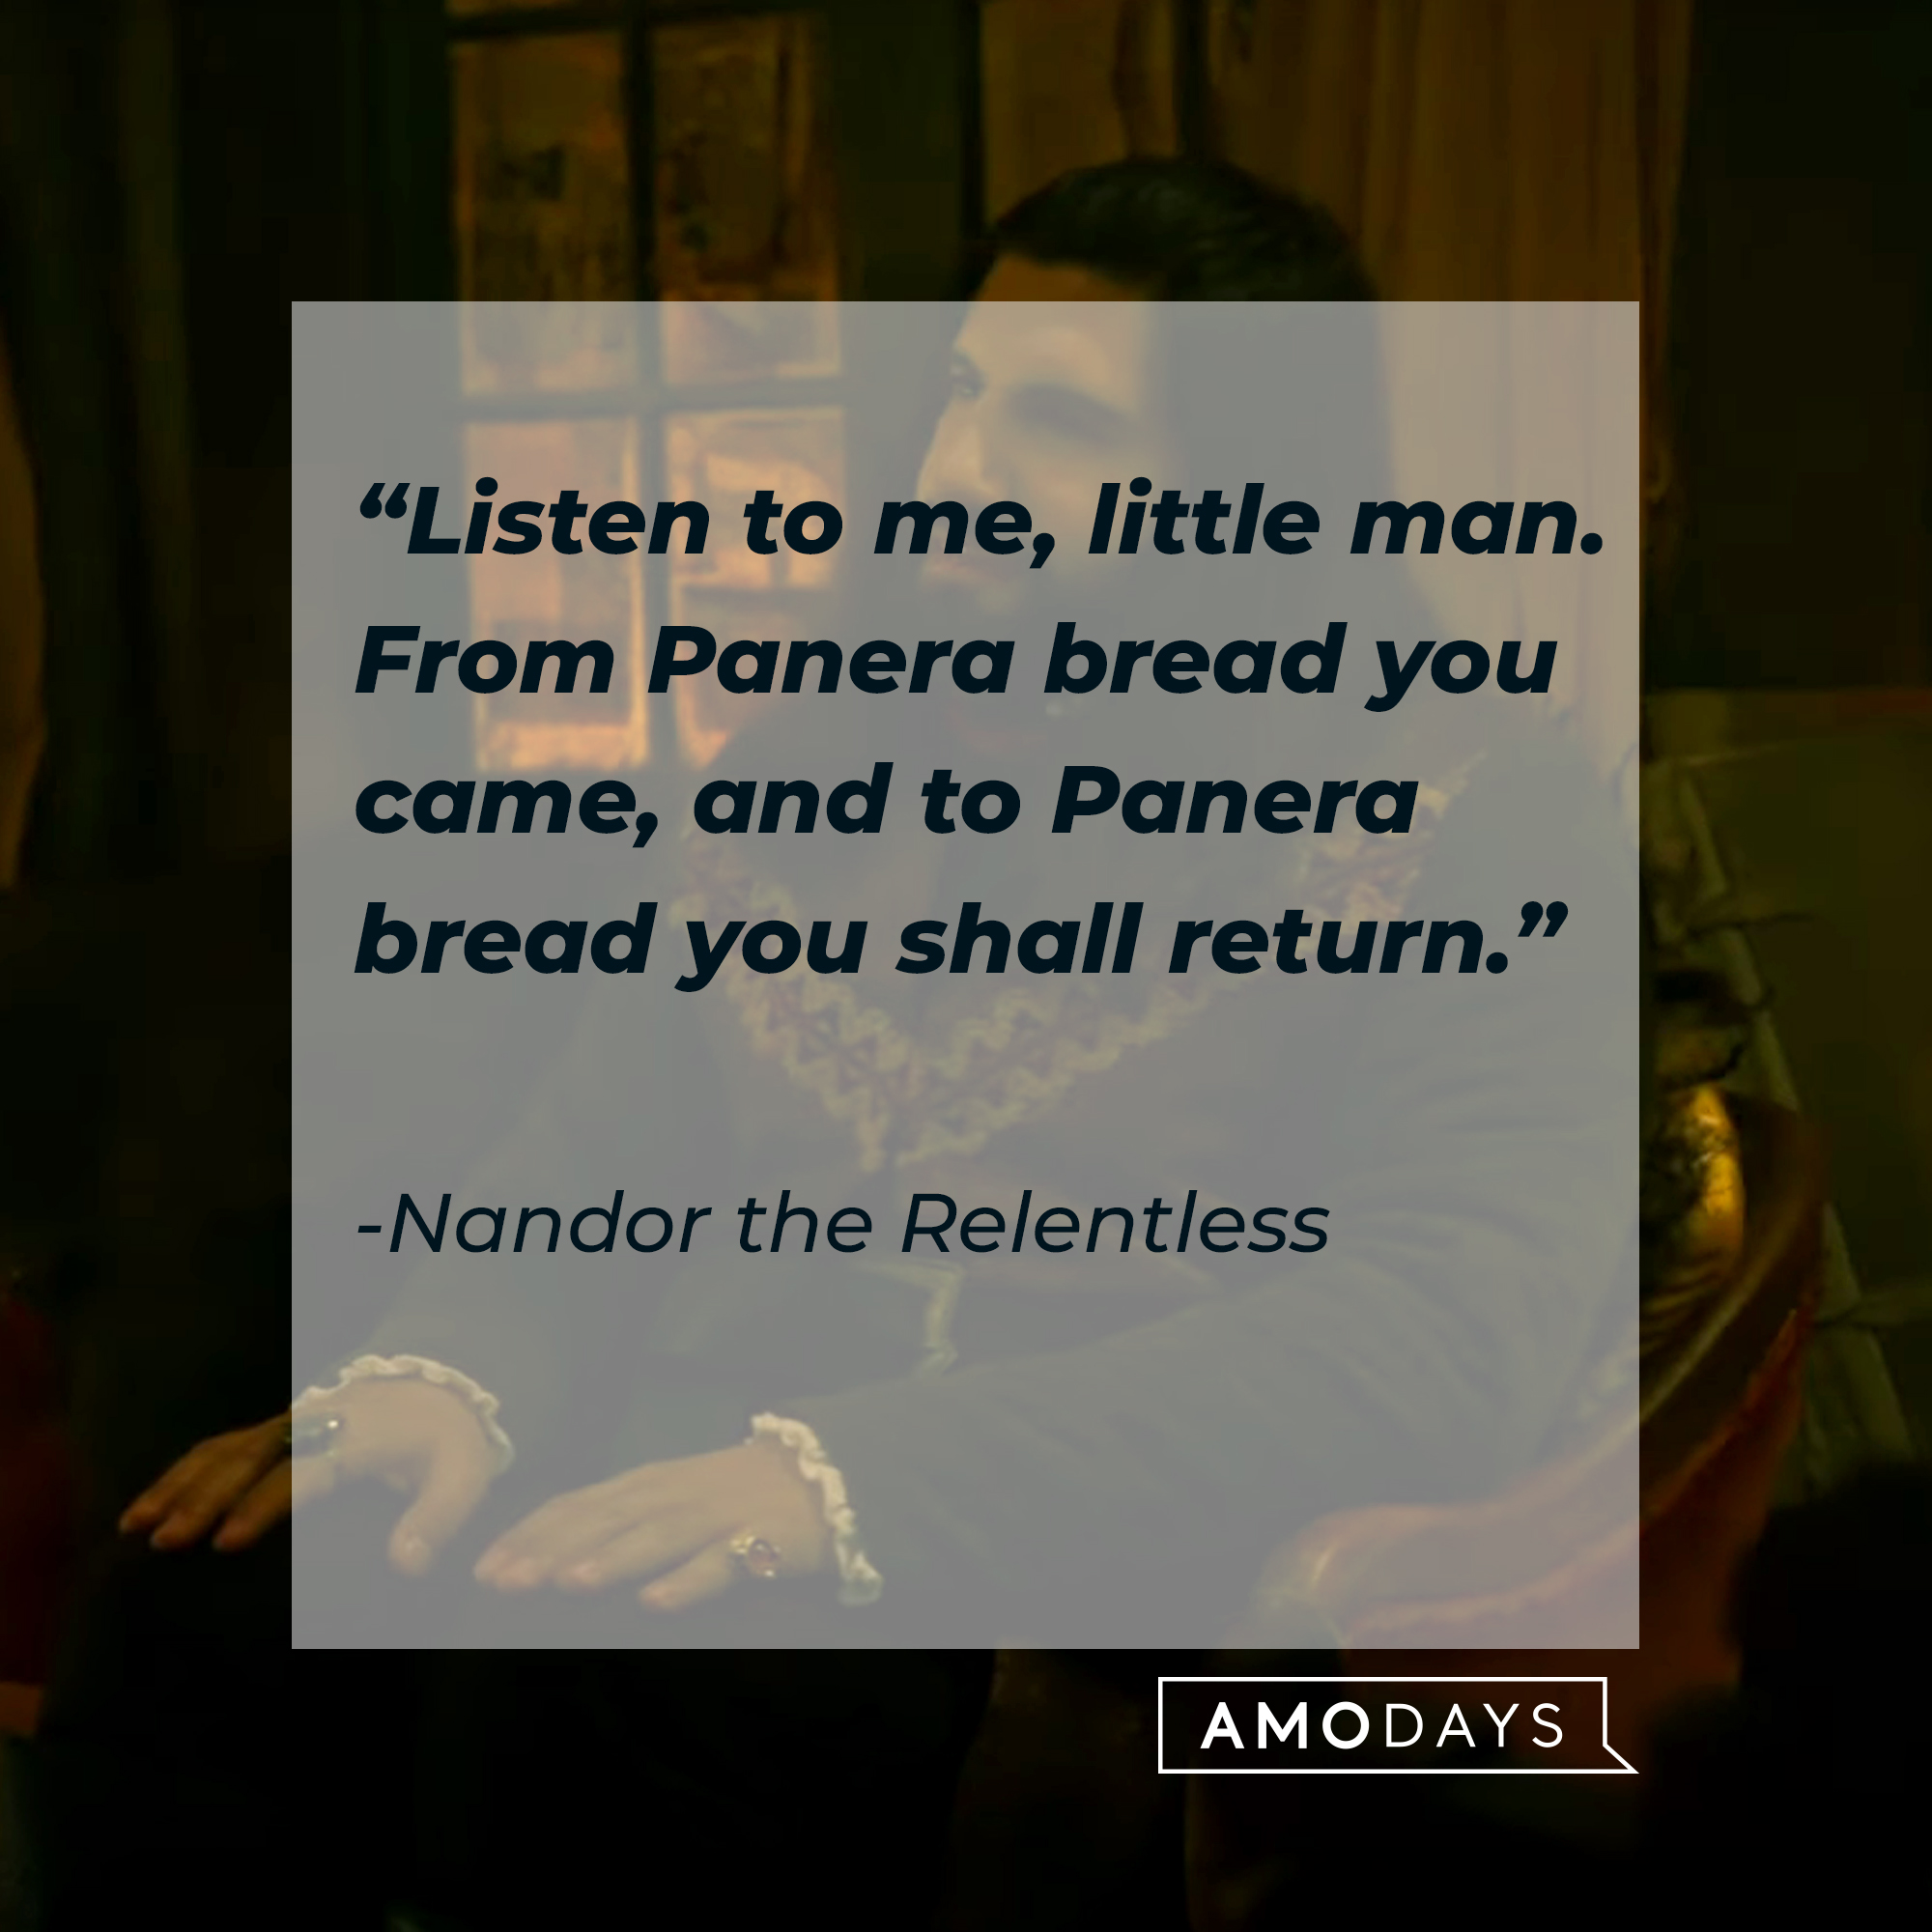 Nandor the Relentless, with his quote: “Listen to me, little man. From Panera bread you came, and to Panera bread you shall return.” | Source: Facebook.com/TheShadowsFX